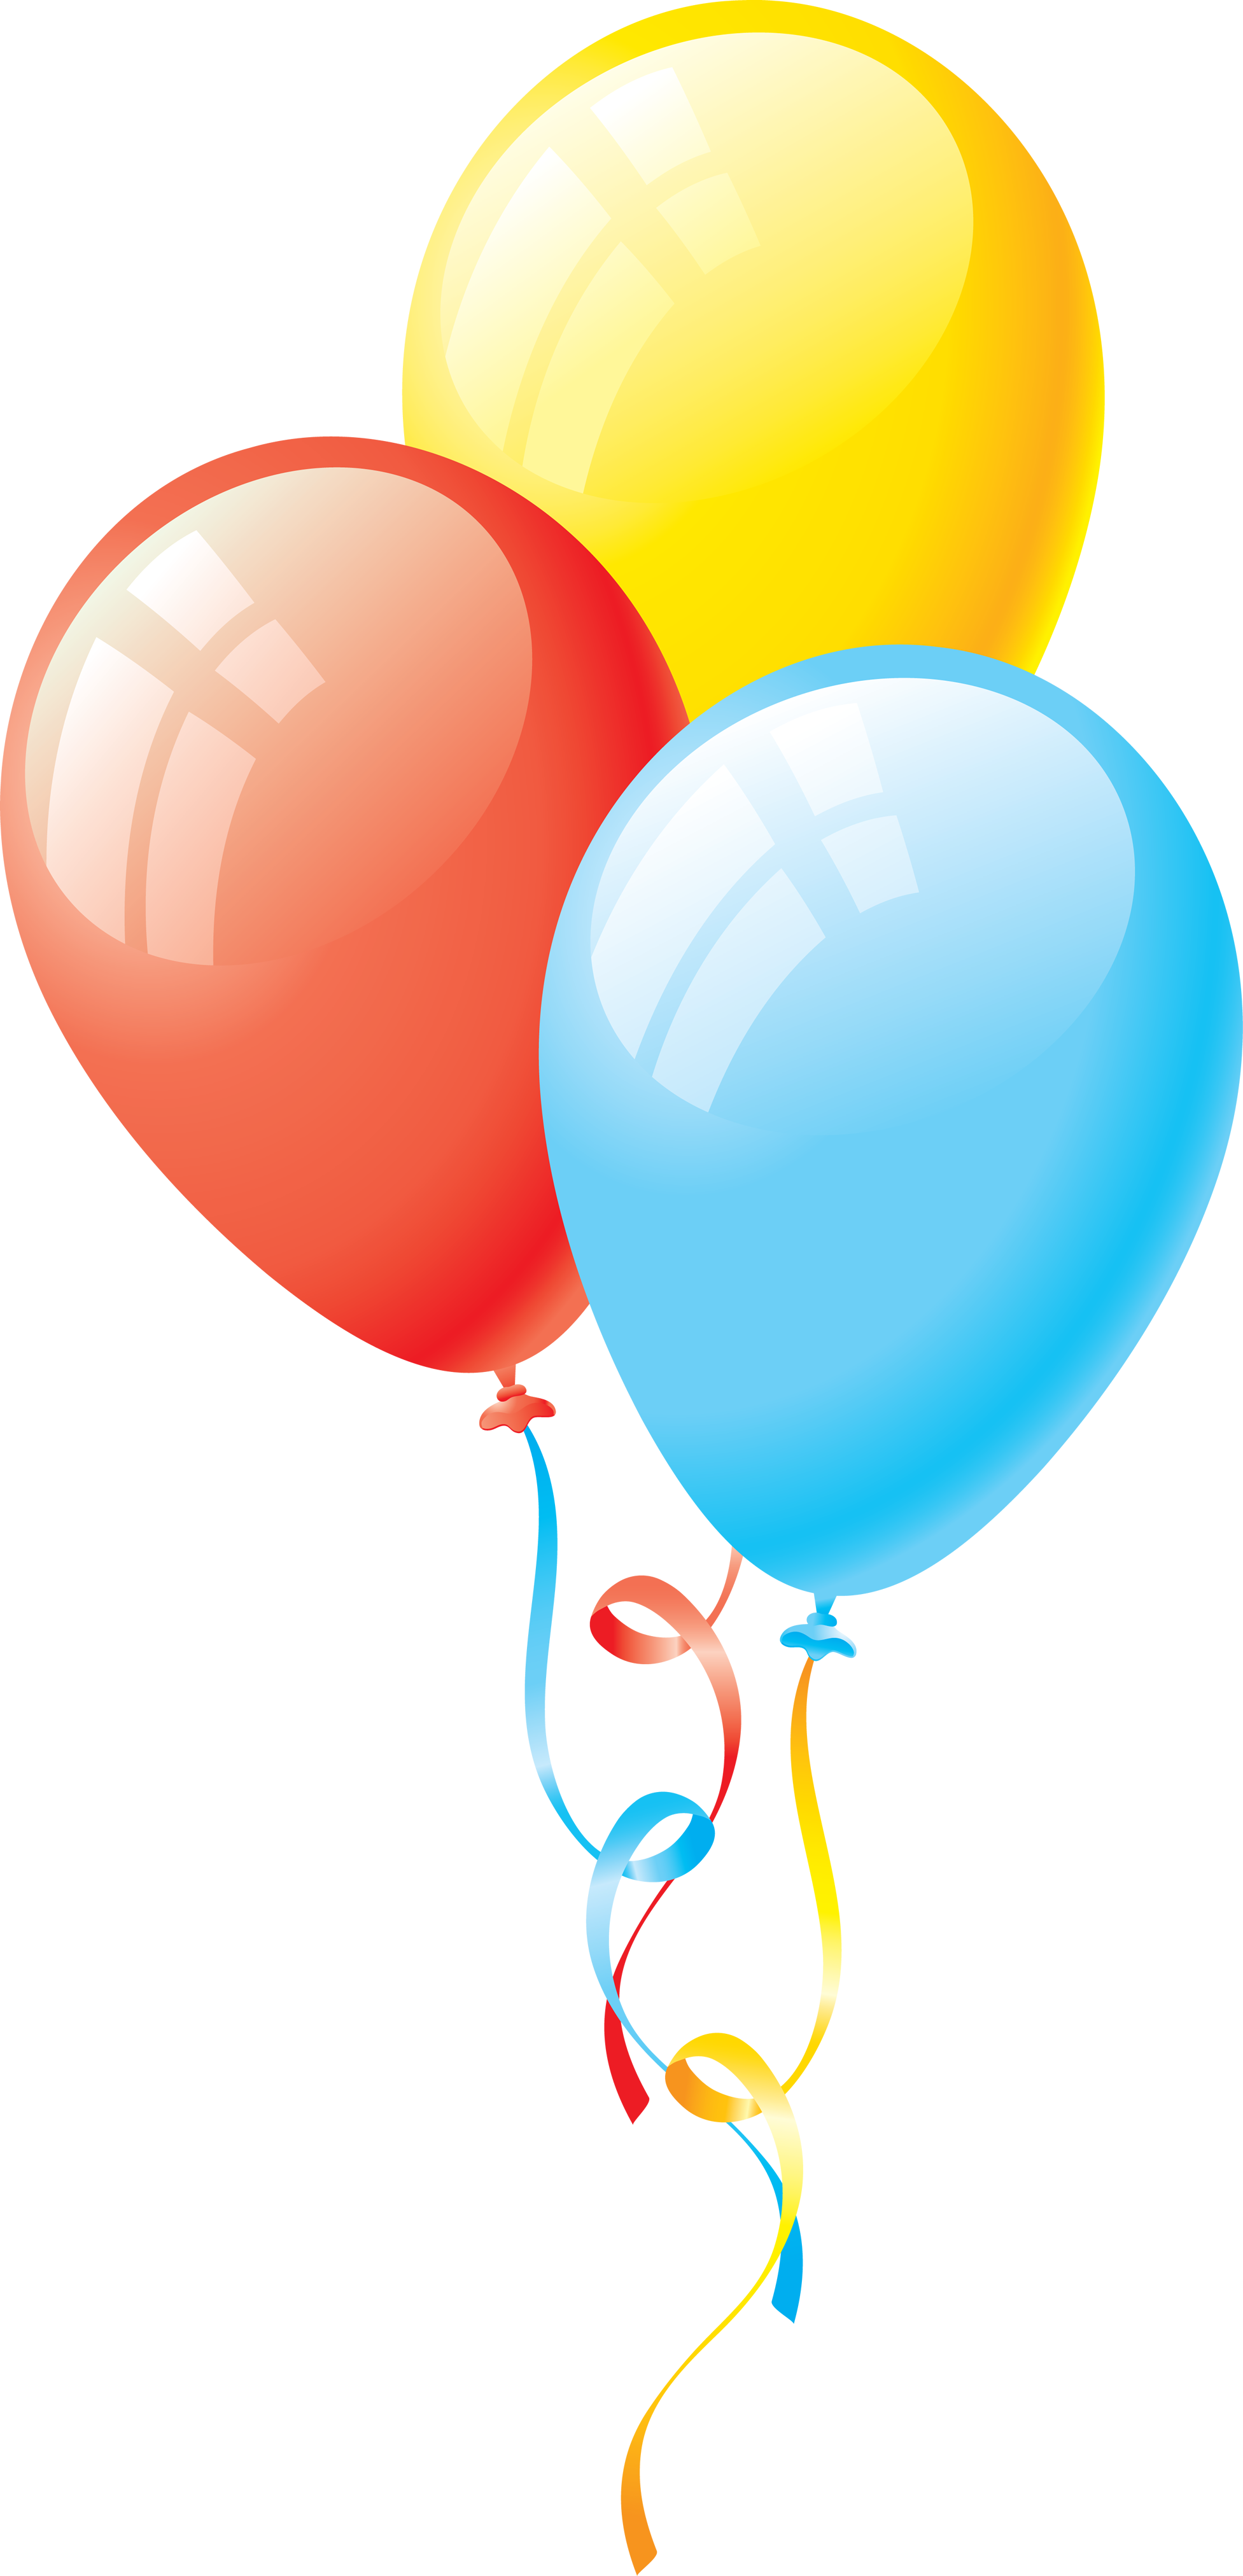 clipart images of balloons - photo #42